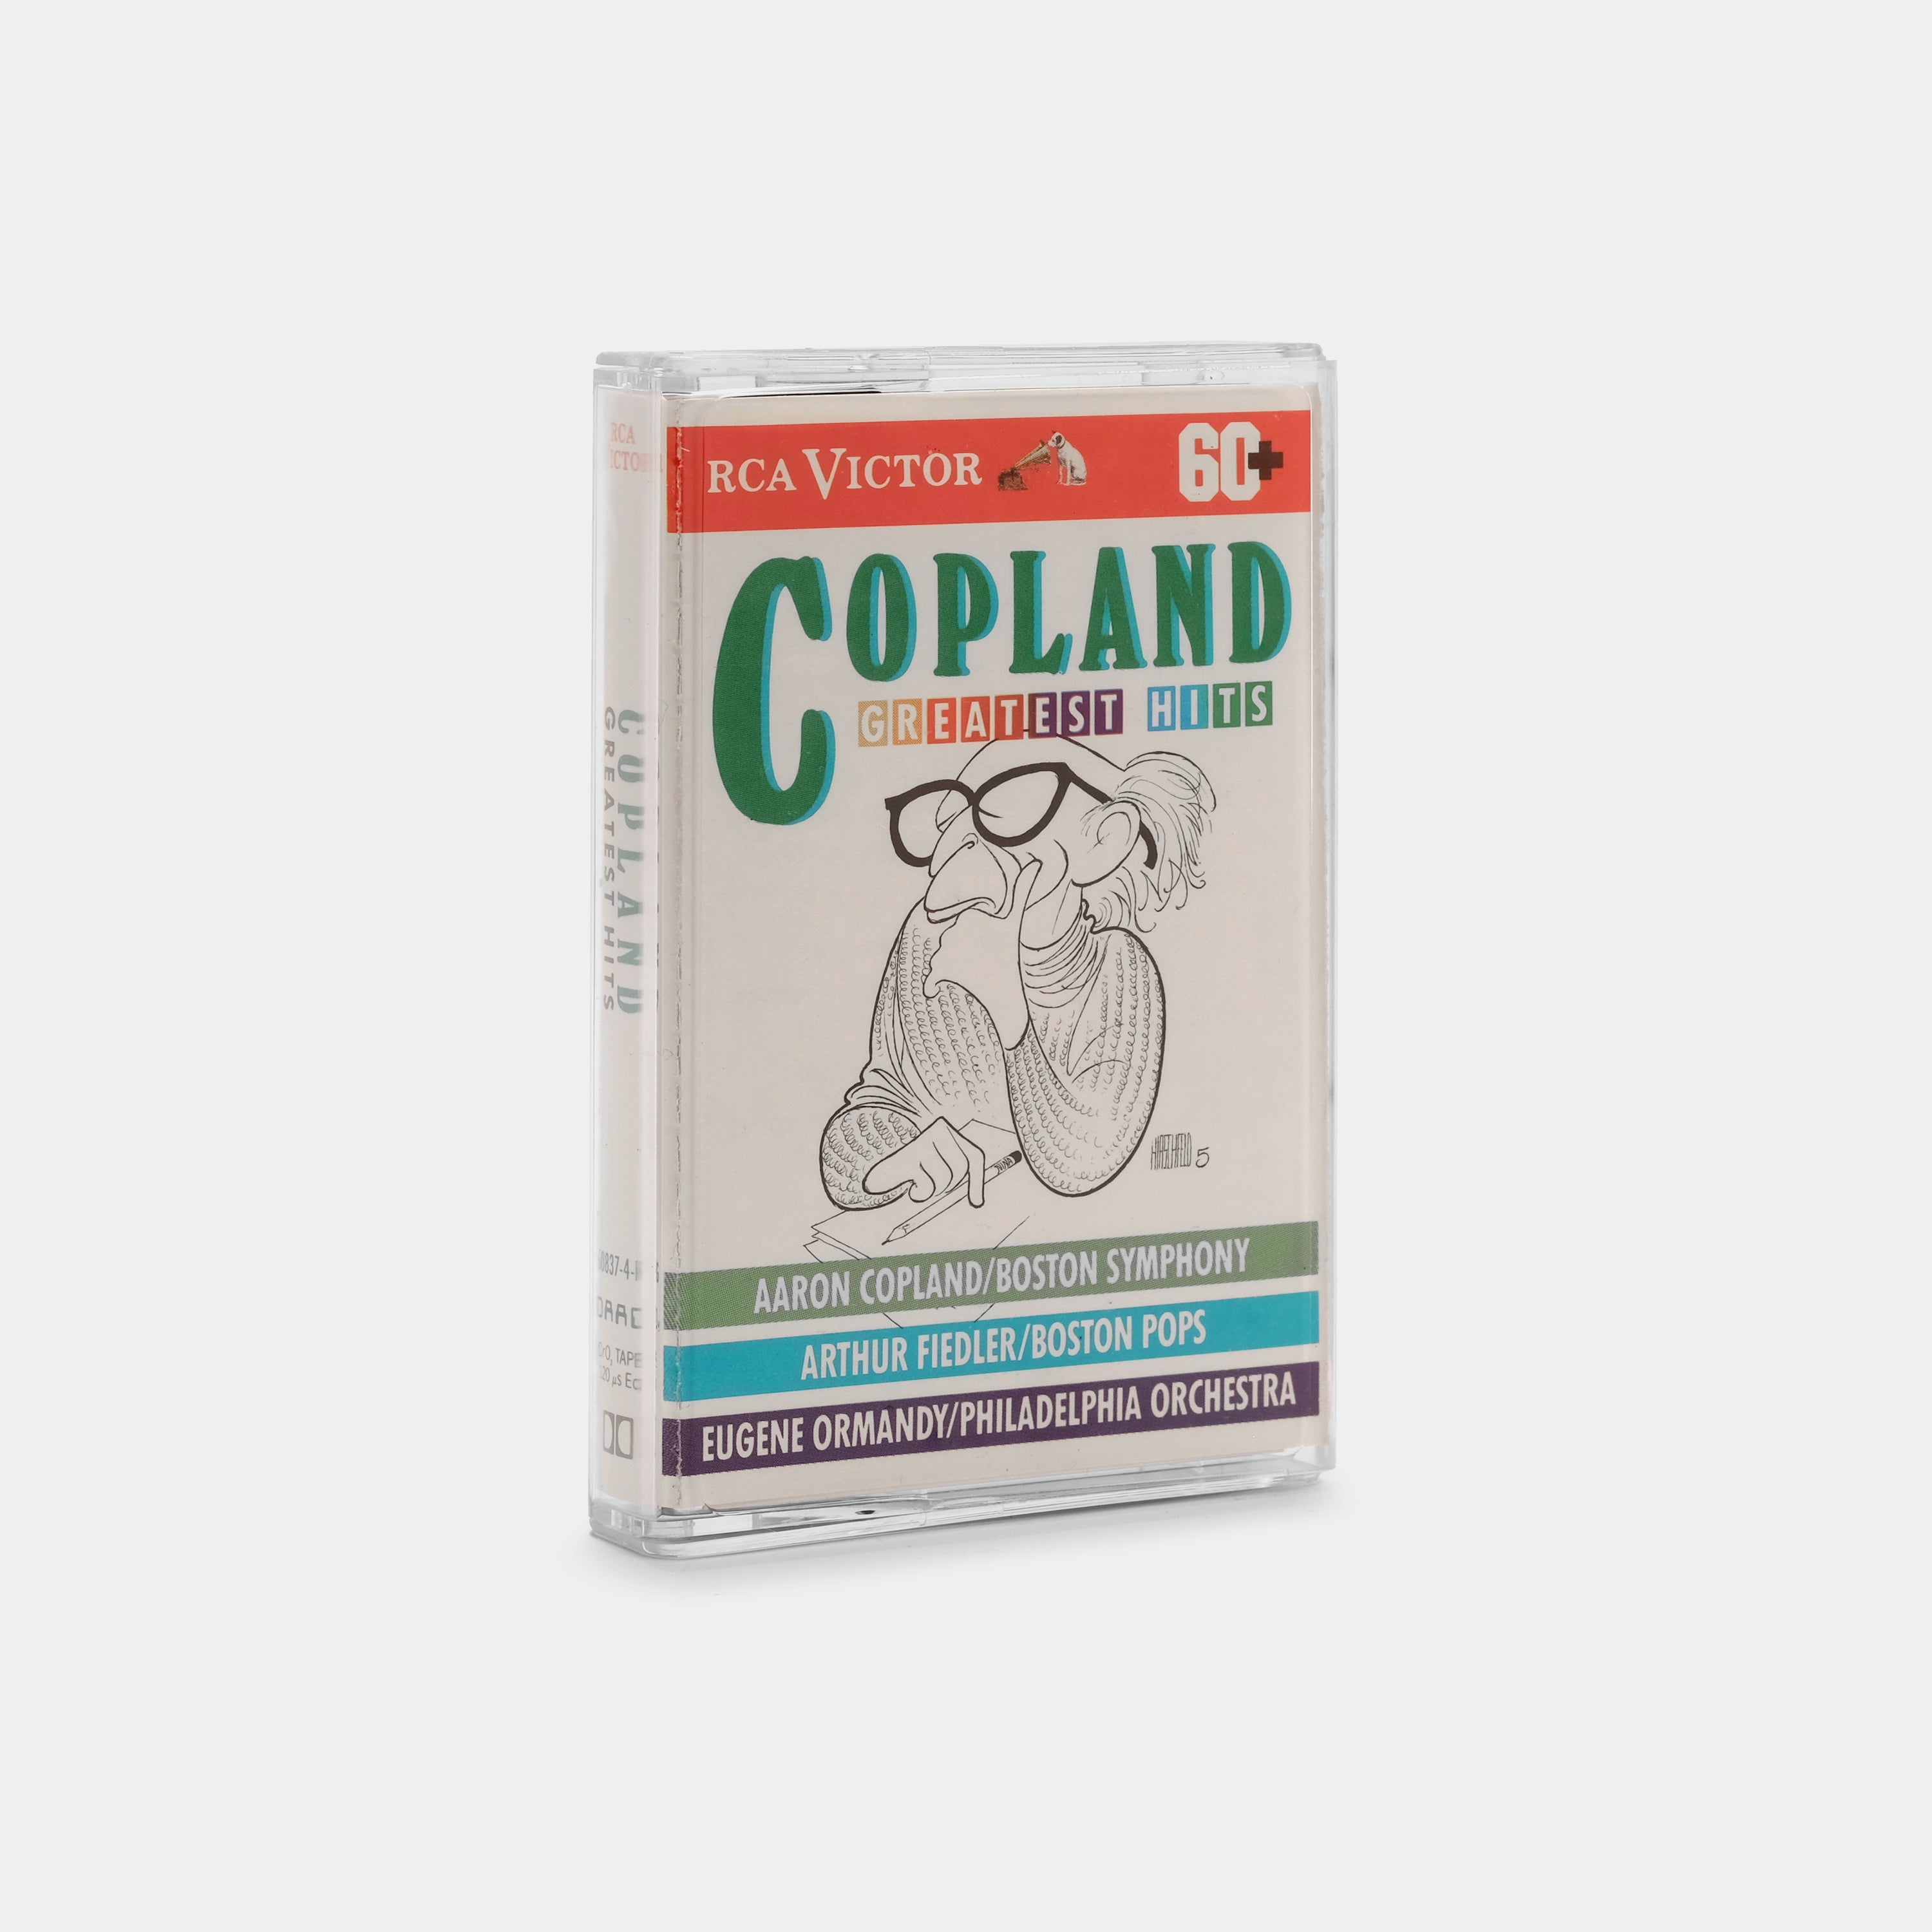 Copland: Greatest Hits Cassette Tape